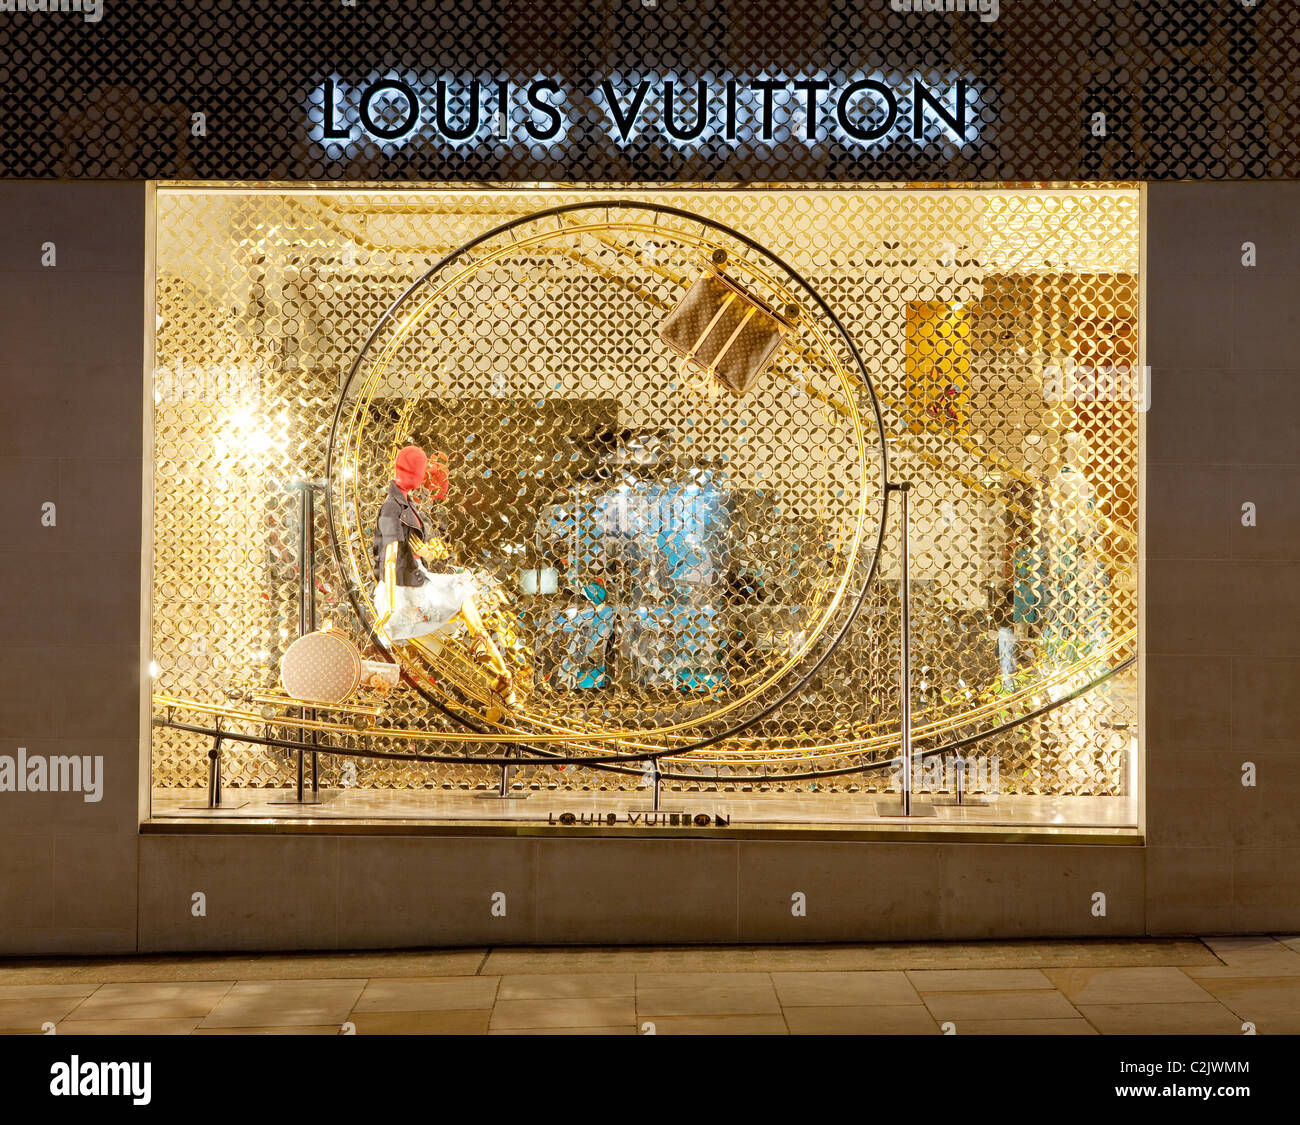 Louis Vuitton flagship store in London in the evening Stock Photo: 36065364 - Alamy